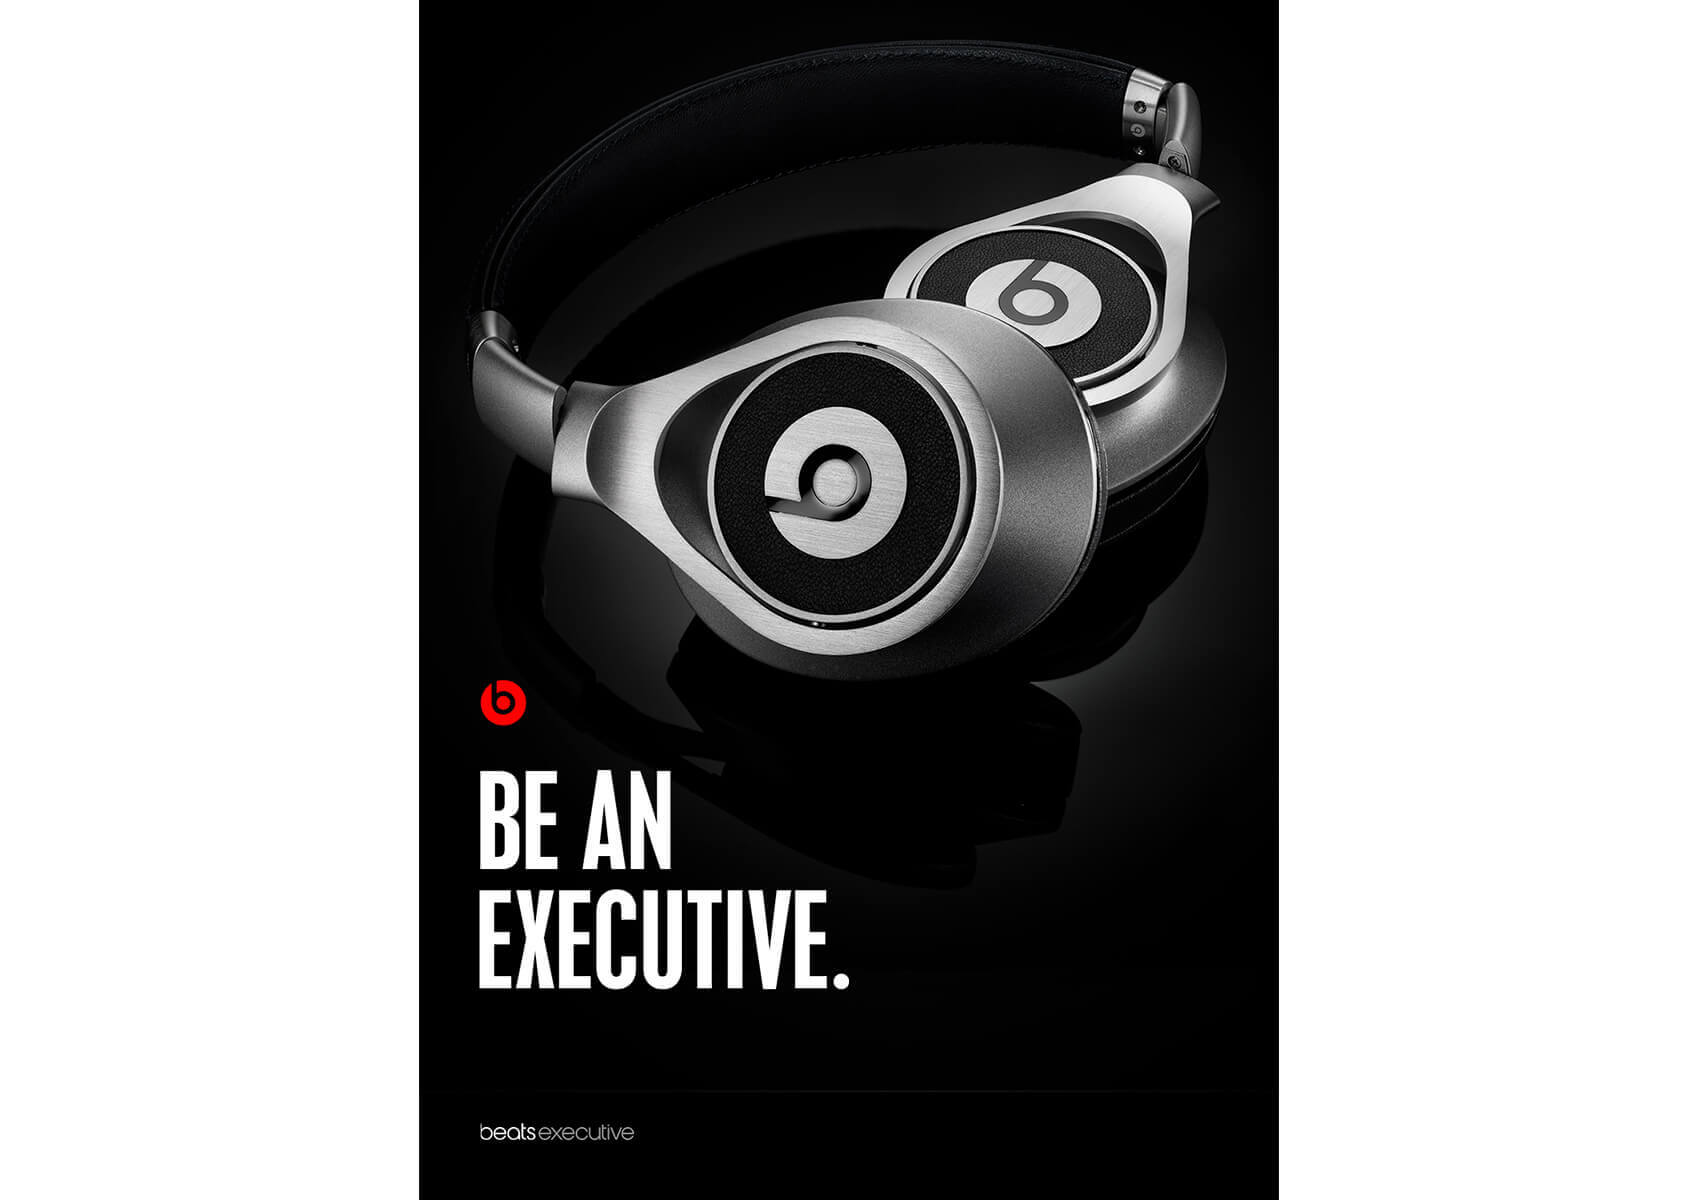 Beats-by-dre-Executive_SinglePageSpread08-B